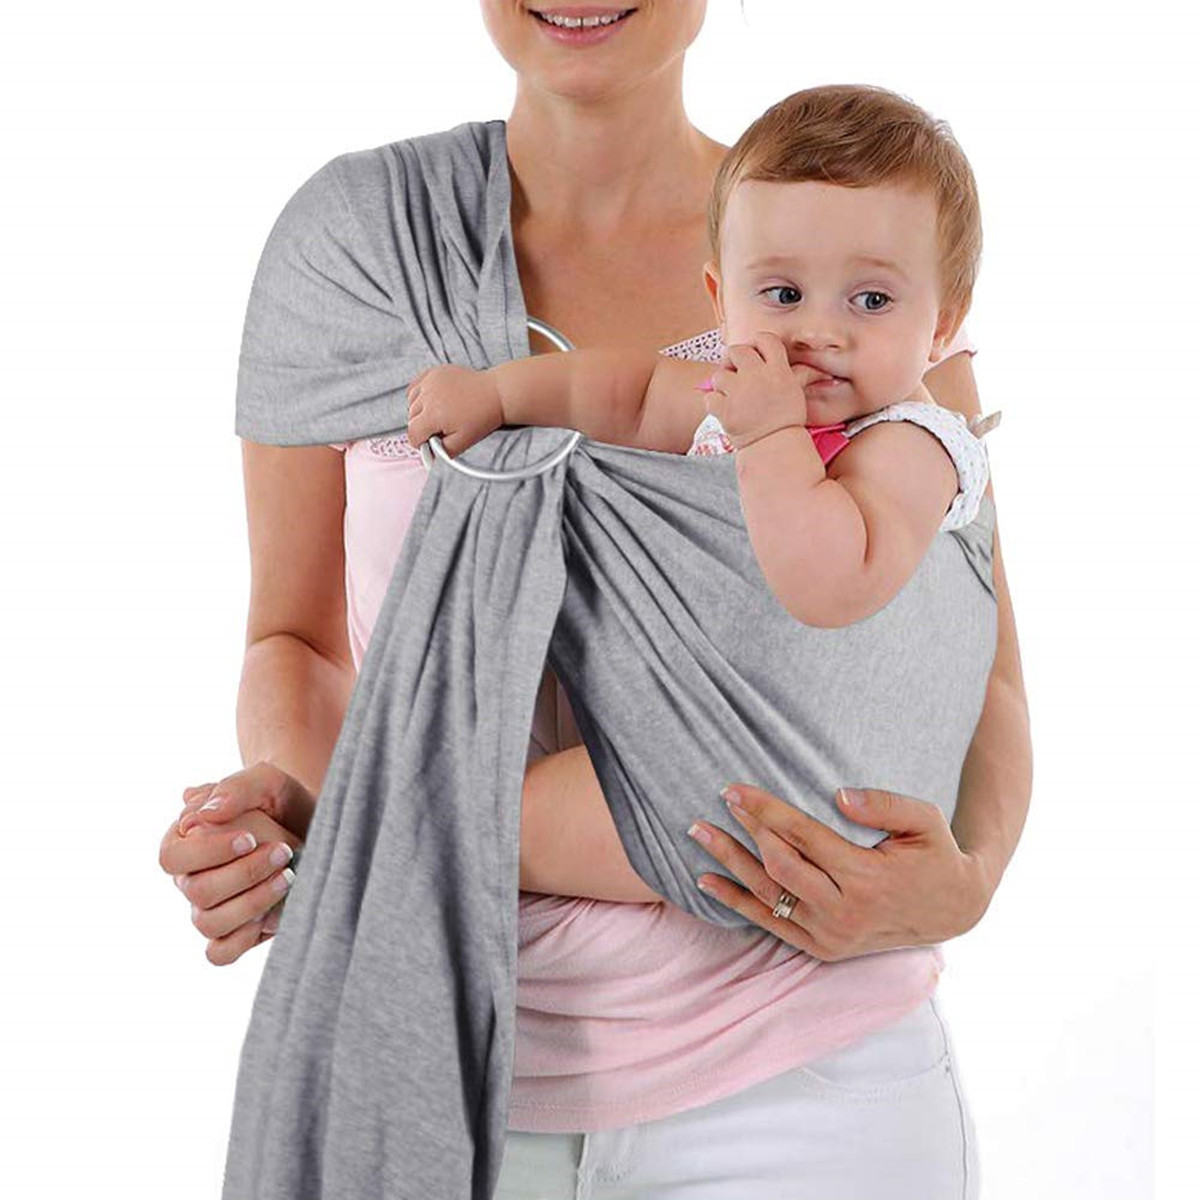 Cotton-Baby-Carrier-Wrap-Breathable-Hip-seat-Stretchy-Baby-Wrap-Sling-Nursing-Cover-Outdoor-Travel-1810332-1